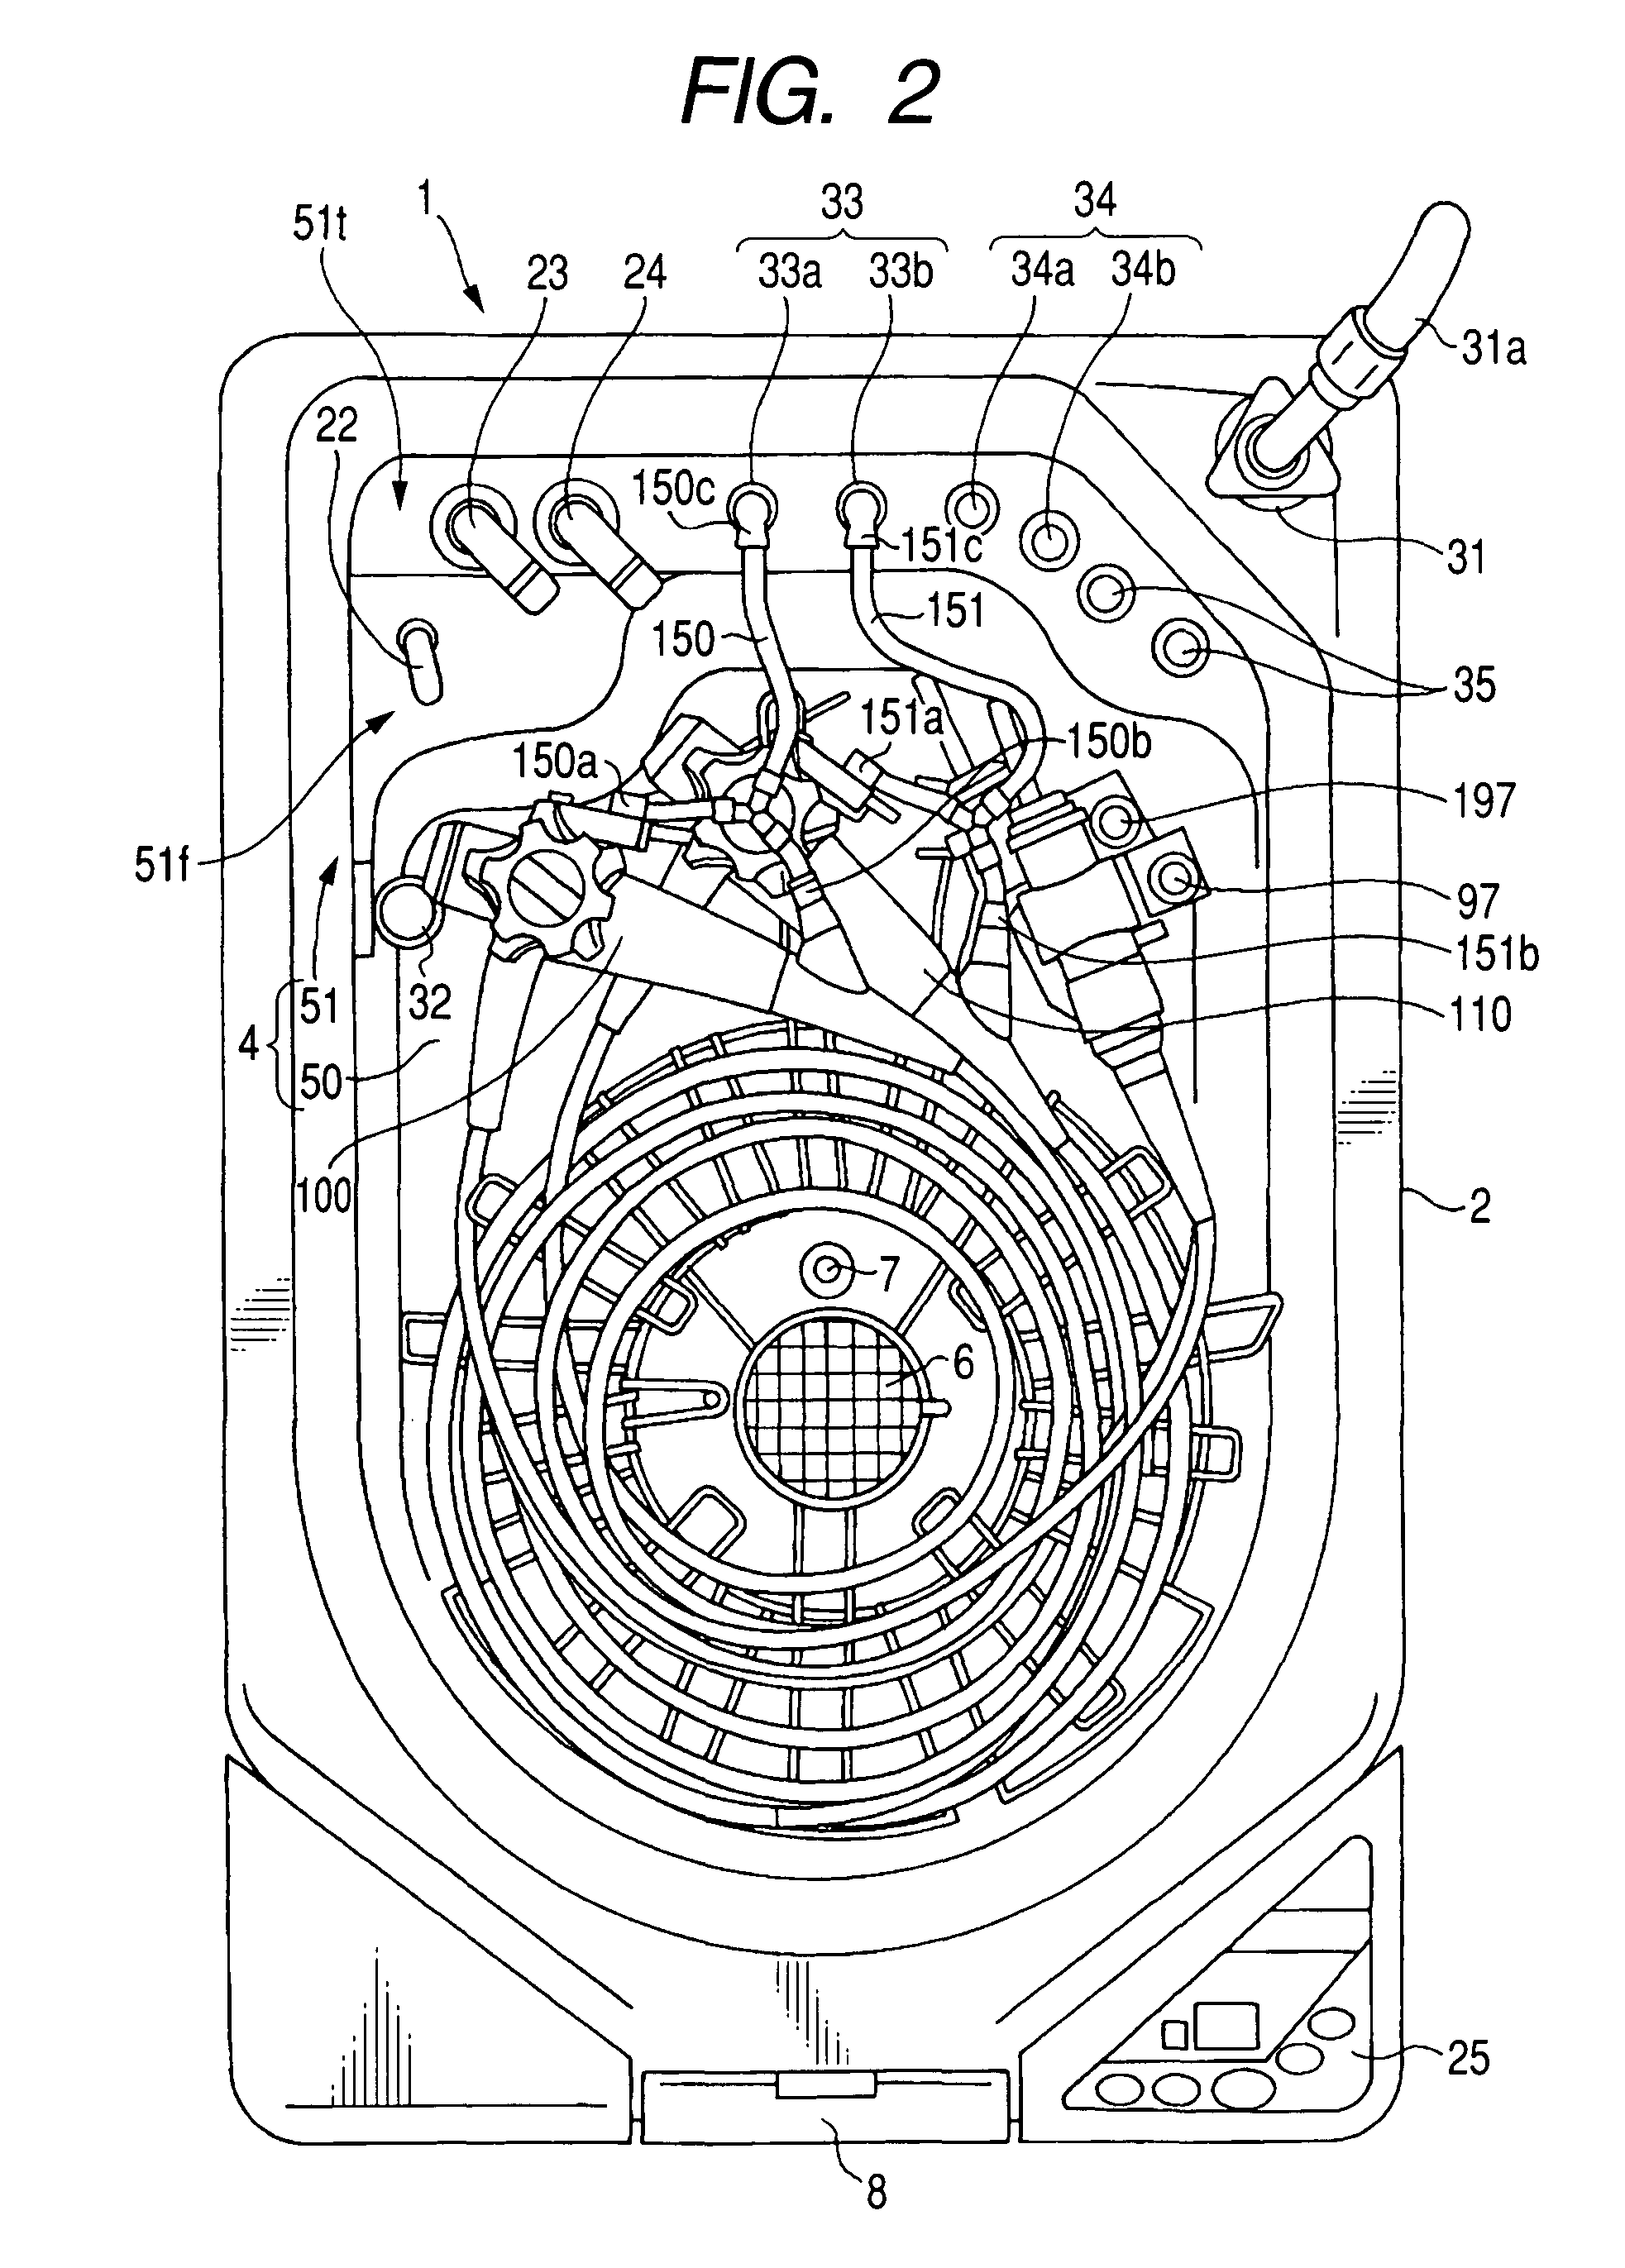 Method for dewatering endoscope channels